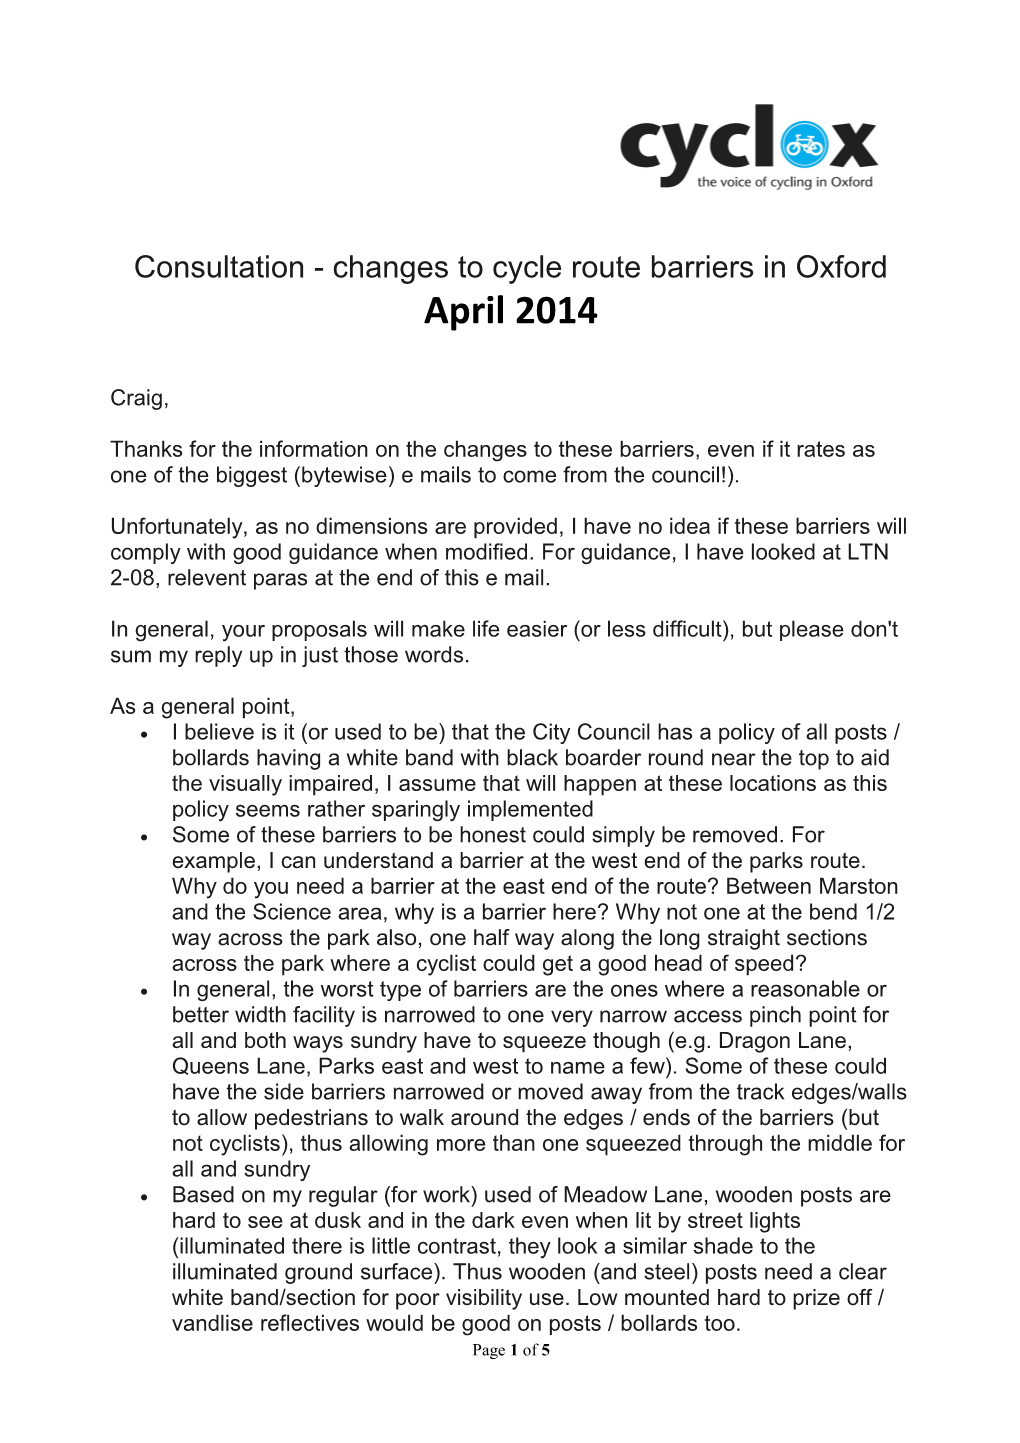 Consultation - Changes to Cycle Route Barriers in Oxford